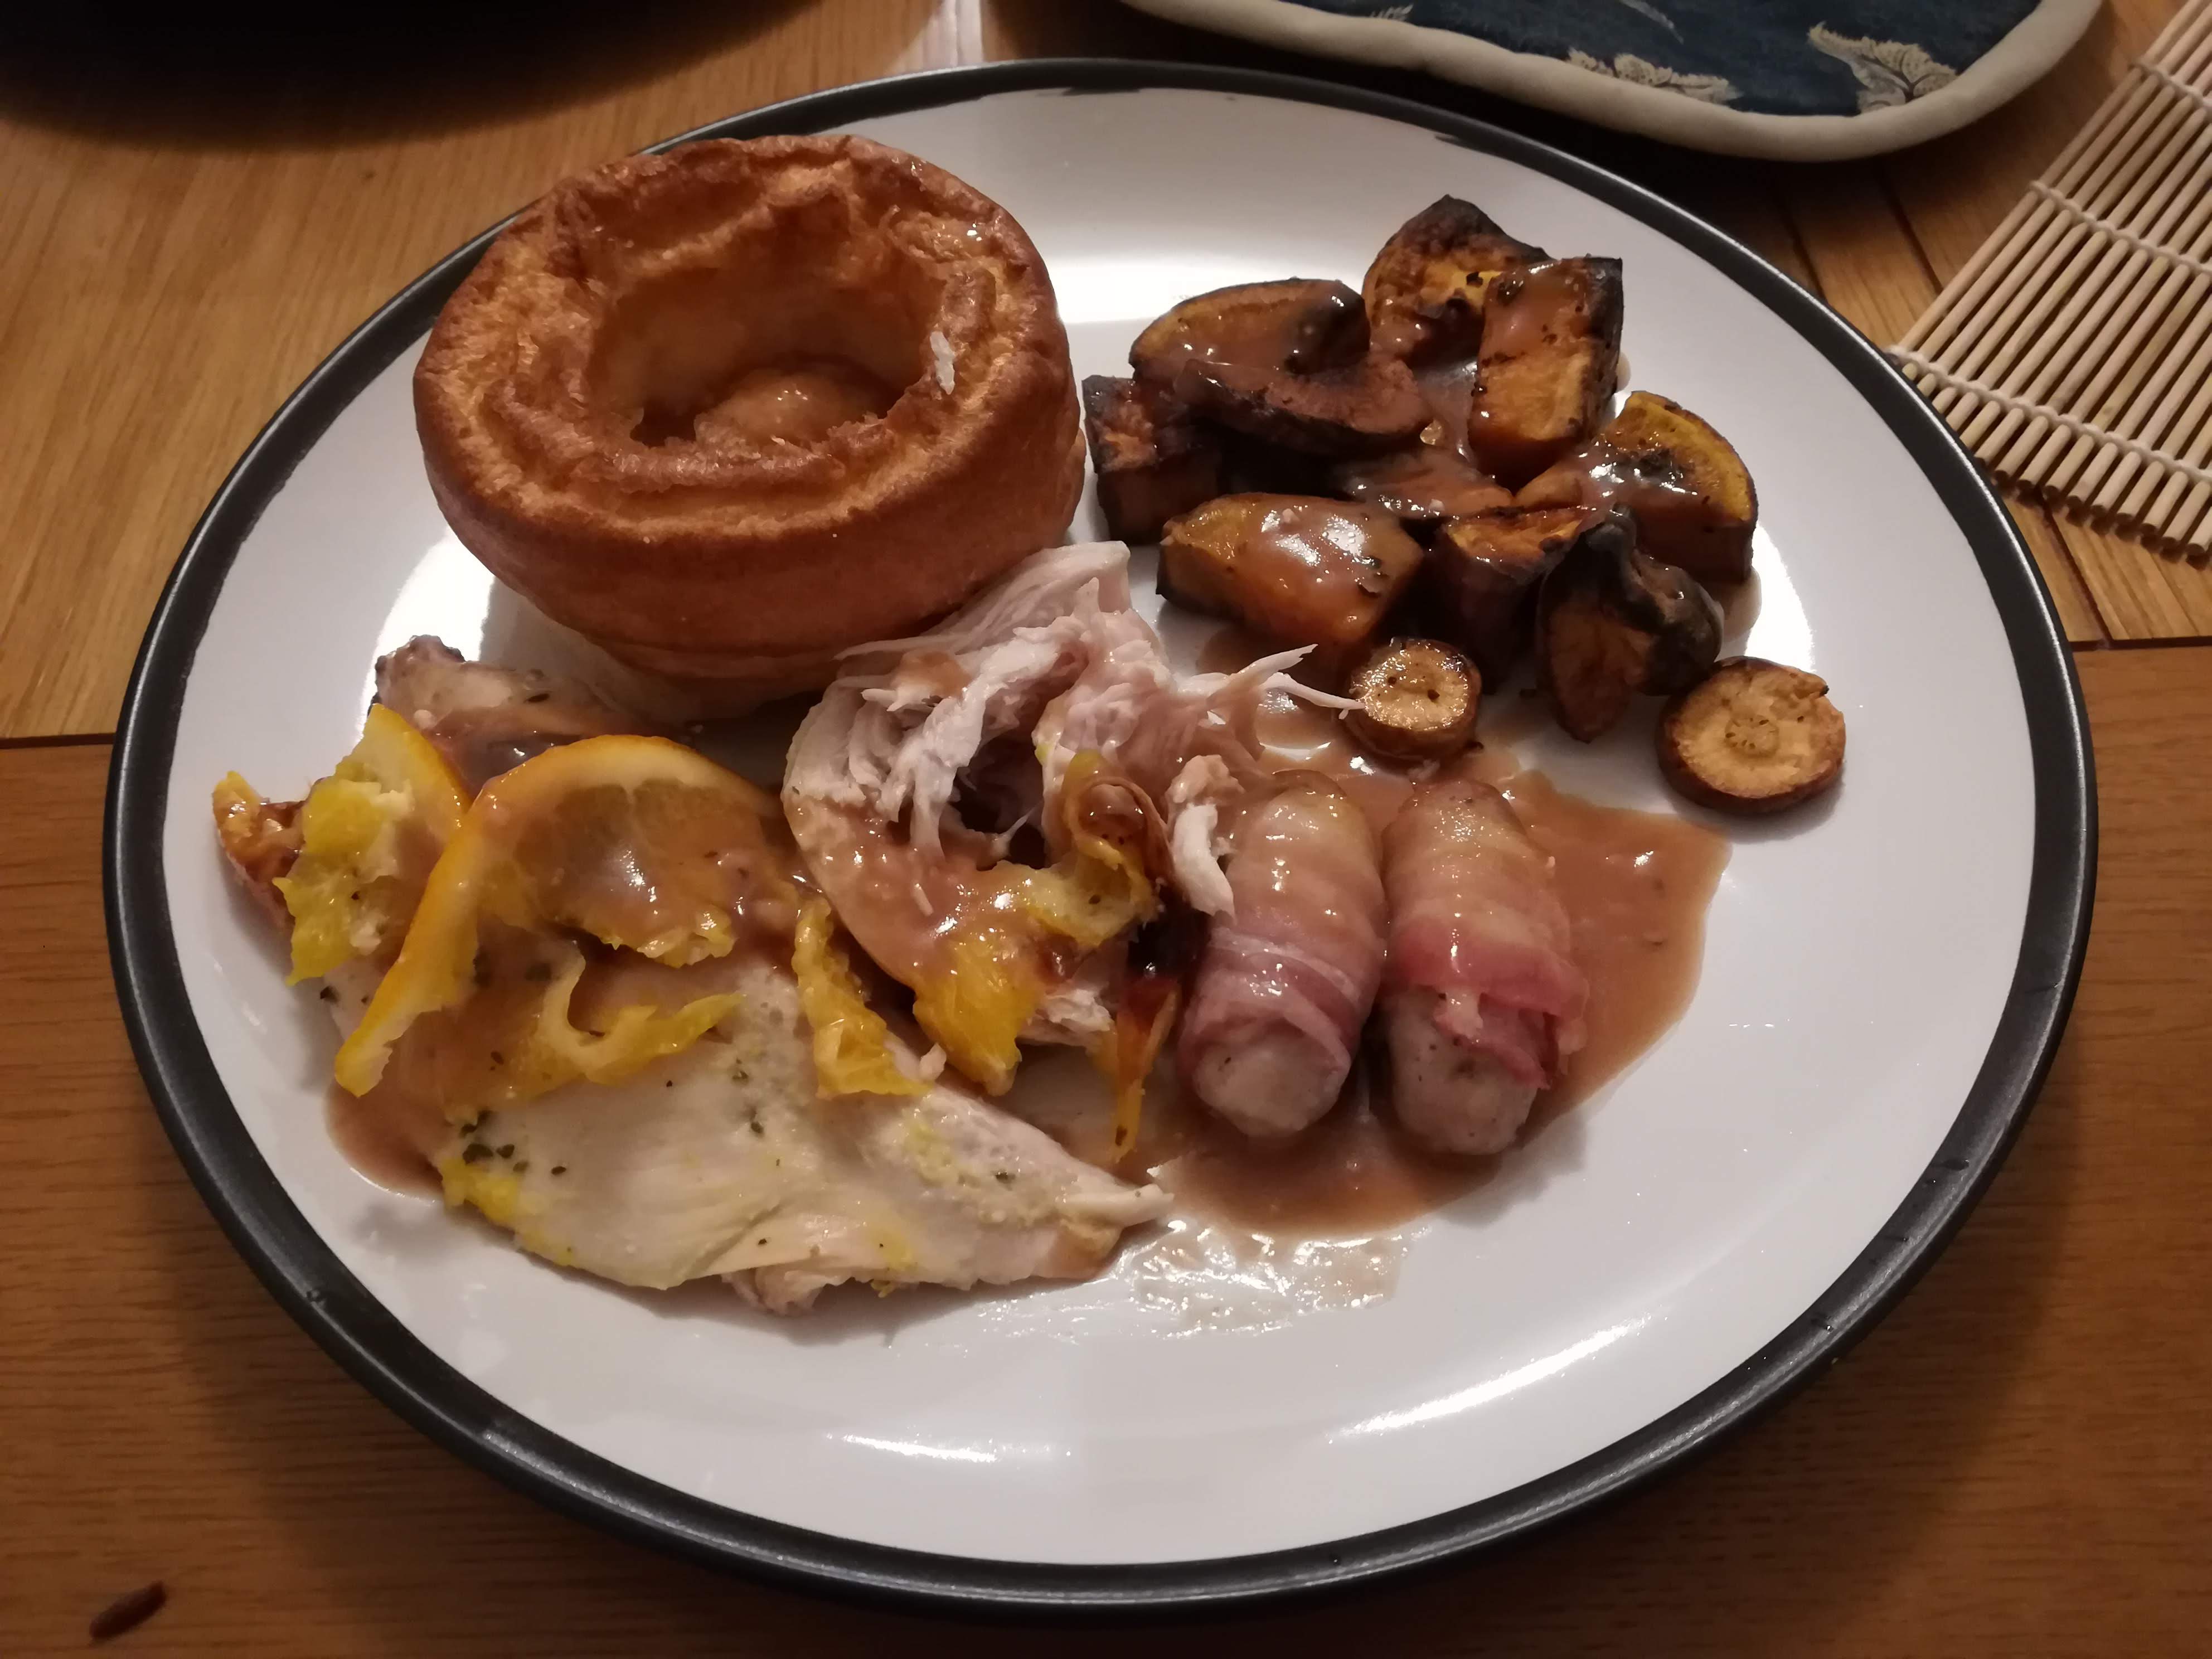 Yorshire pudding, pigs in blankets, roasted vegetables and roasted turkey with orange